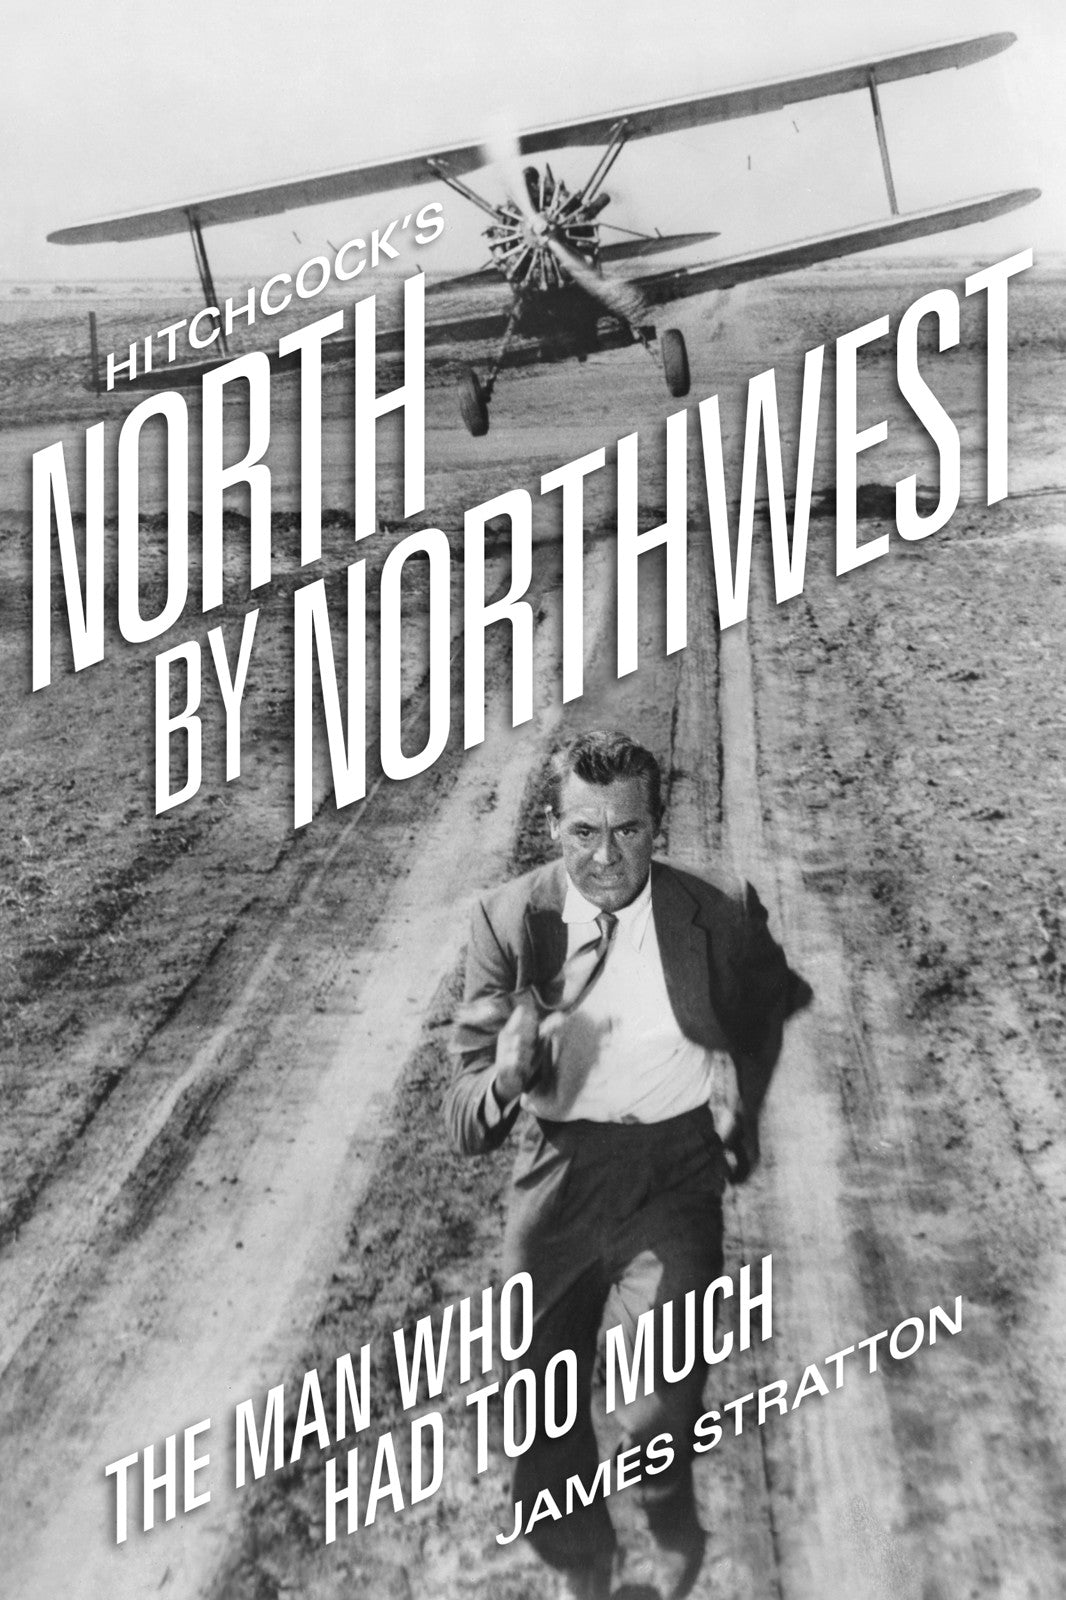 HITCHCOCK'S NORTH BY NORTHWEST: THE MAN WHO HAD TOO MUCH (hardcover)